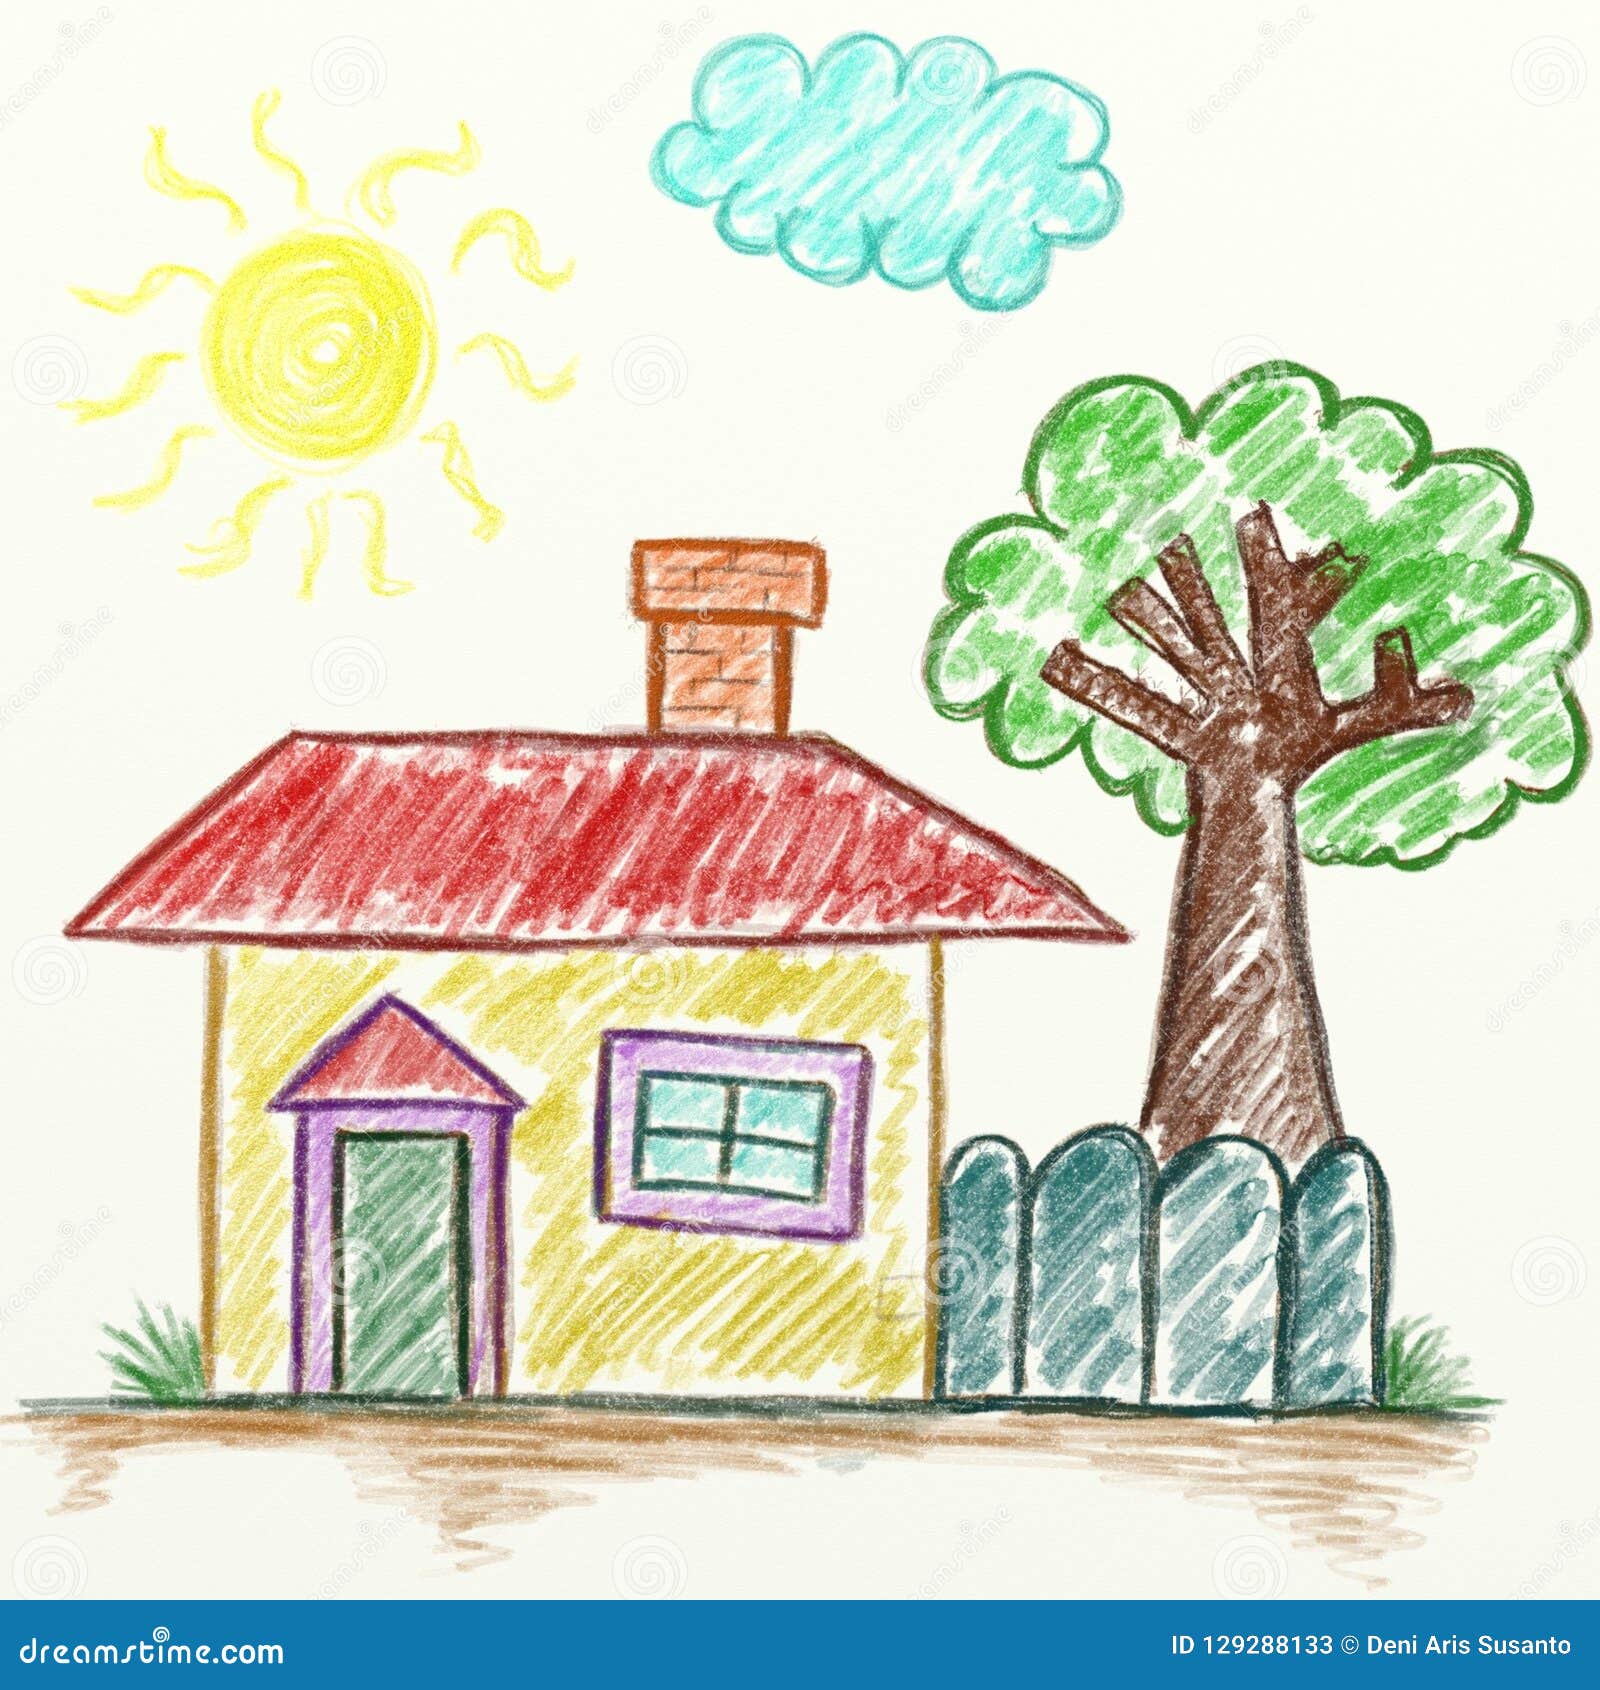 https://thumbs.dreamstime.com/z/child-s-drawing-house-handdrawn-child-s-drawing-house-handdrawn-cartoon-isolated-white-129288133.jpg